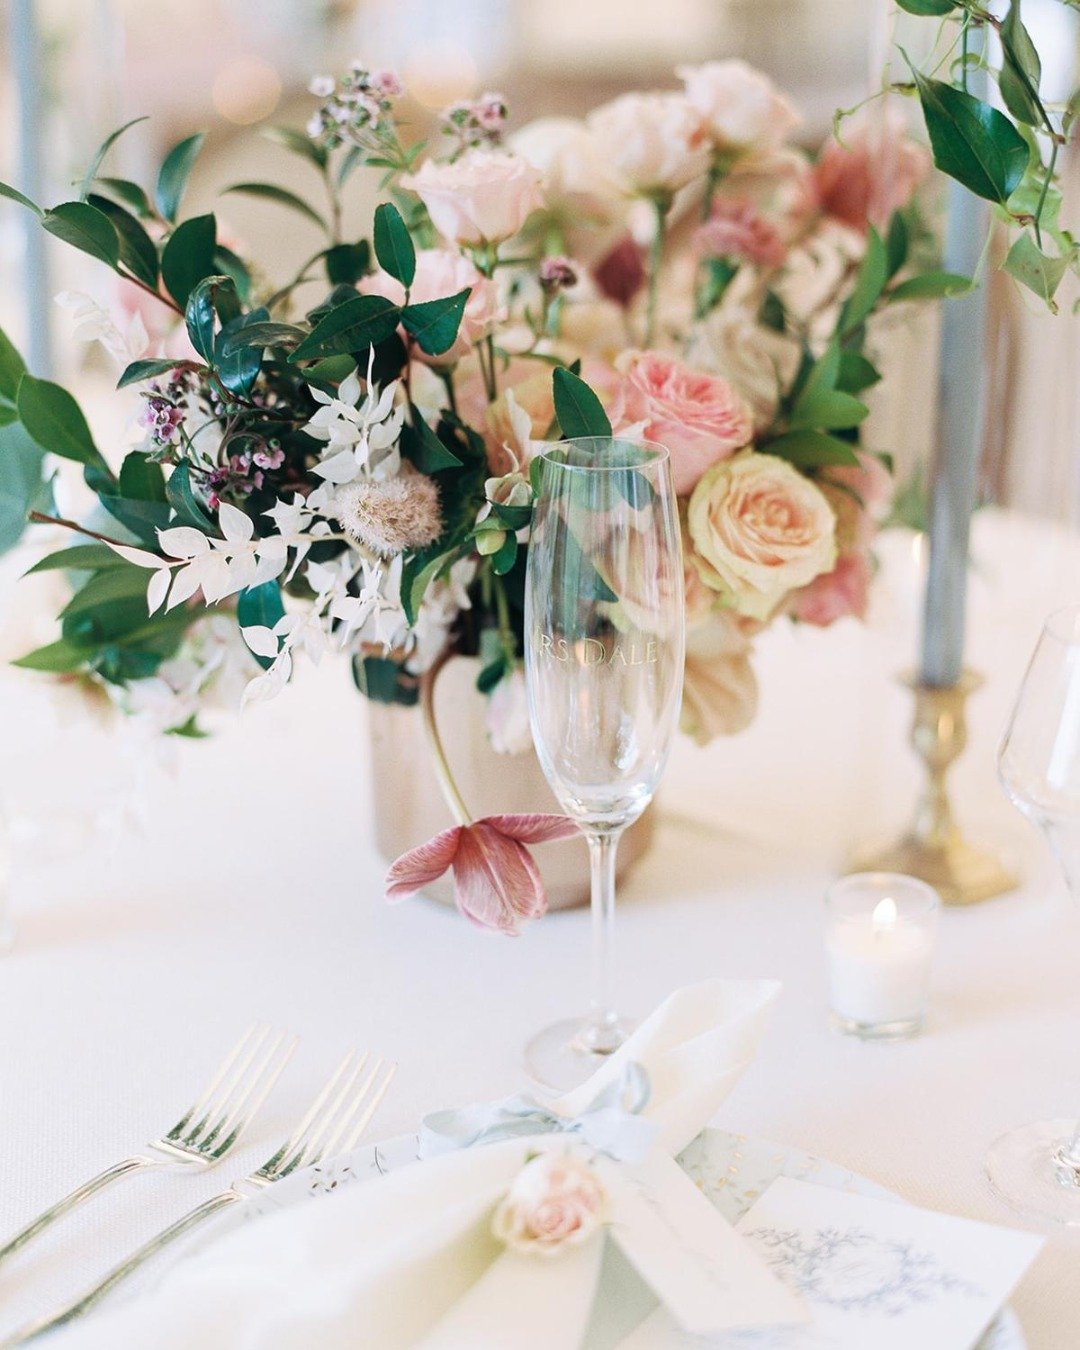 If you're yearning for a charmingly romantic and whimsical d&eacute;cor for your wedding day, this is the style you should embrace. 🩷

Rely on us to curate the ideal atmosphere for your special day, and we'll lead you towards a tailored aesthetic th